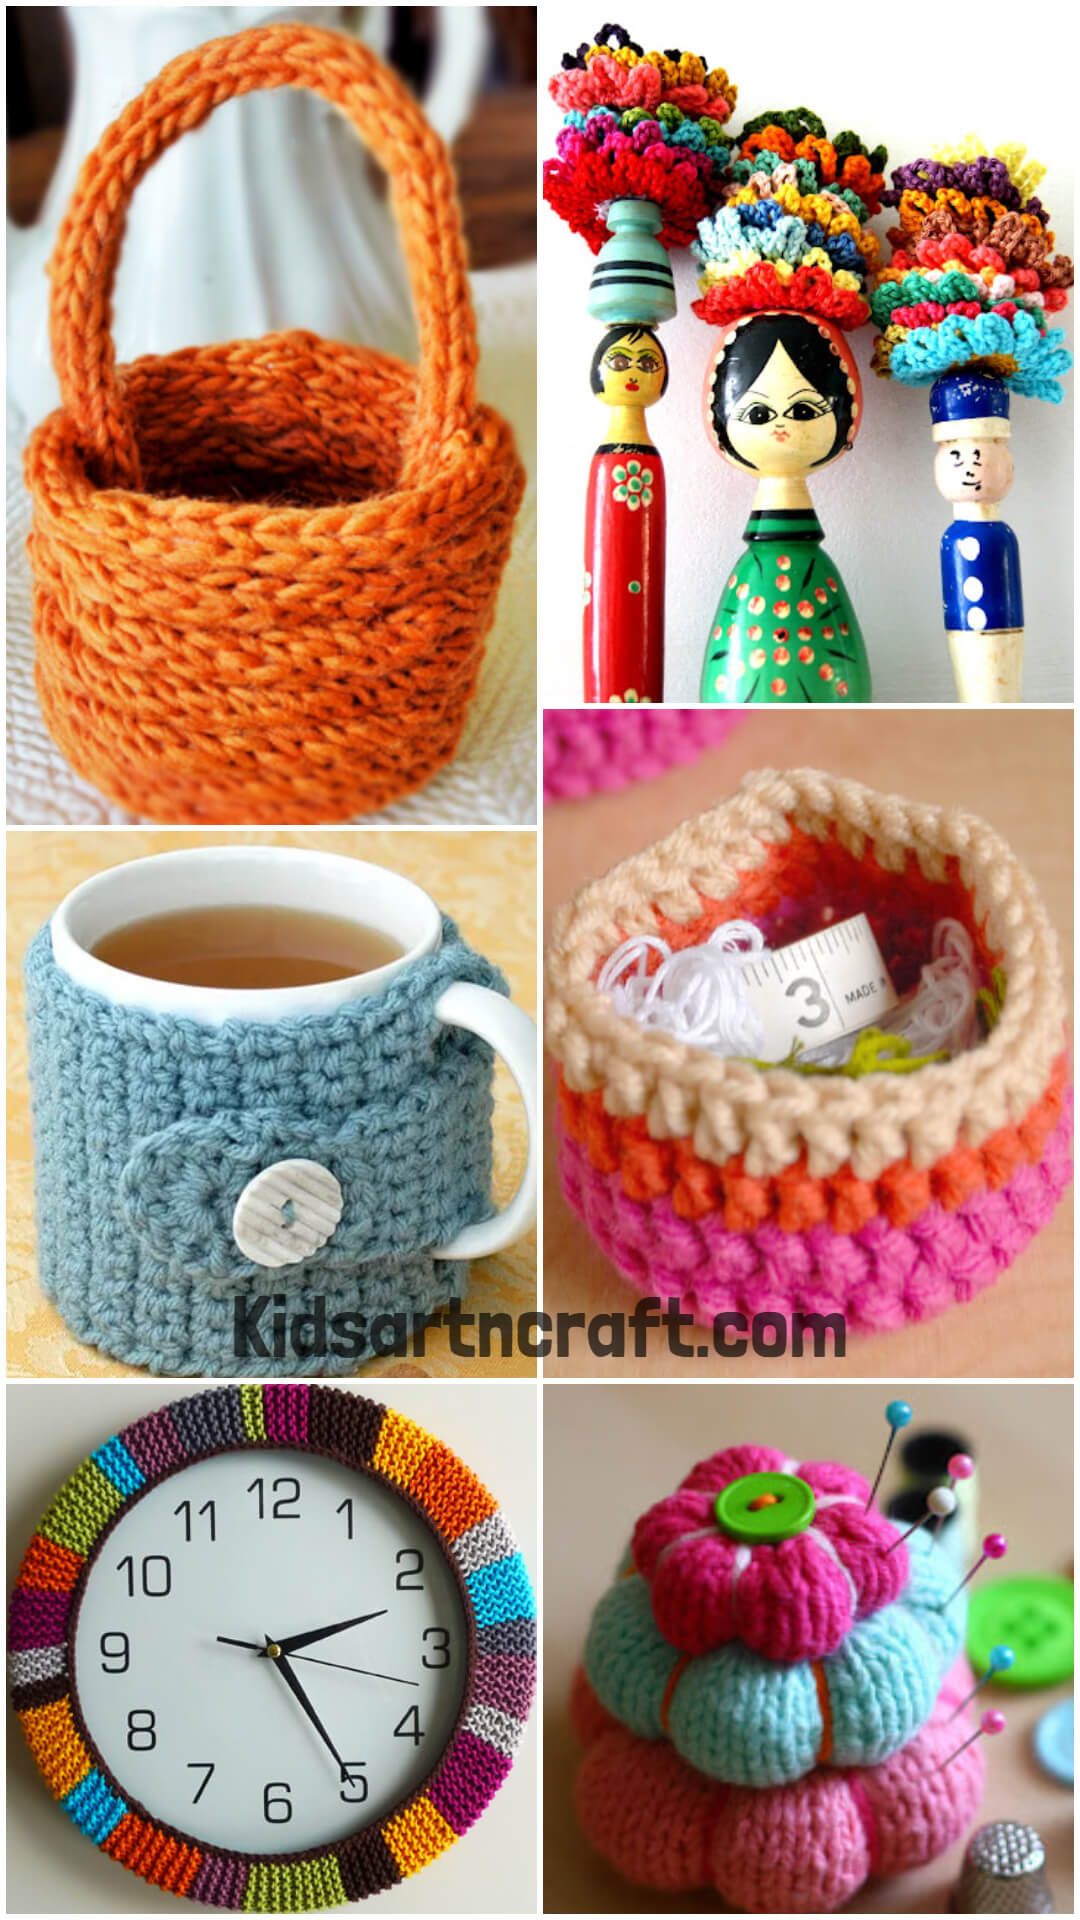 Yarn crafts to sell